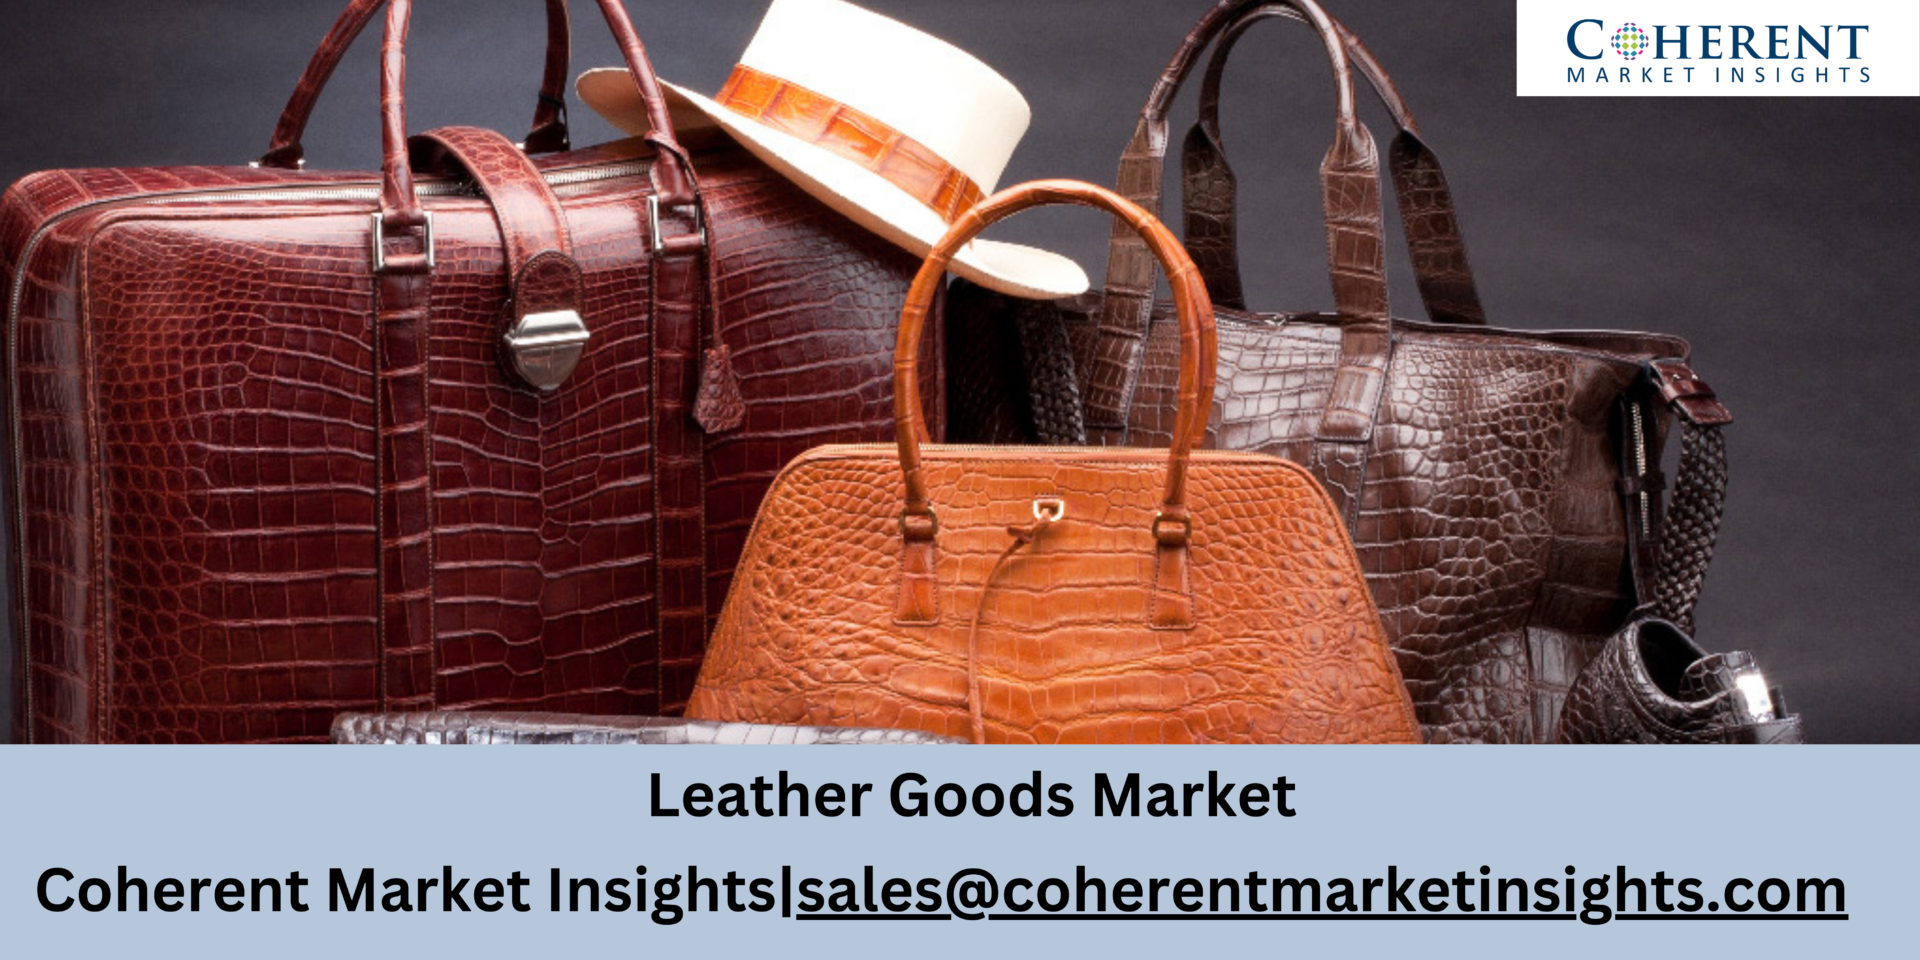 The Leather Goods Market Is Estimated To Be Valued At US$ 2932.5 Billion In 2021 And Is Expected To Exhibit A CAGR Of 5.18% Over The Forecast Period 2022-2030